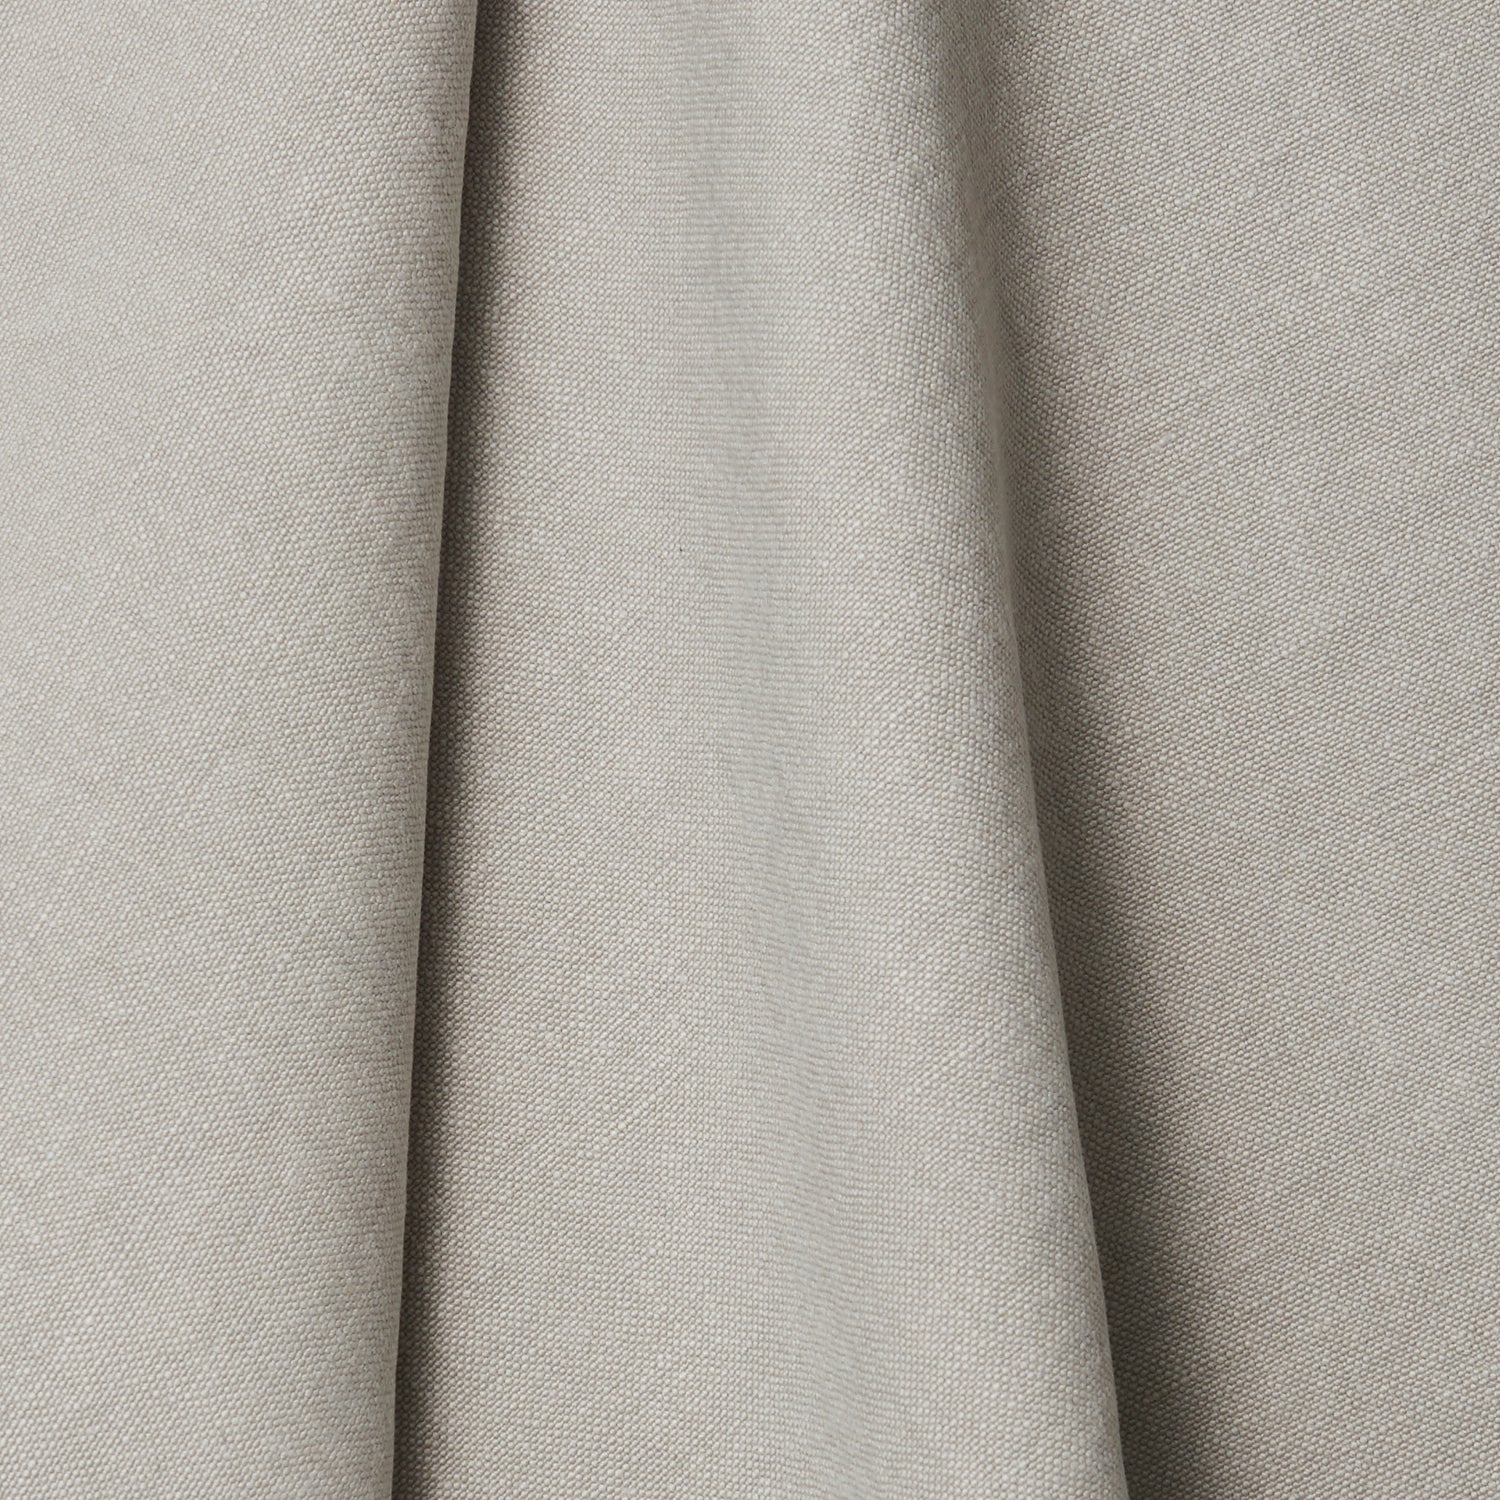 A draped swatch of linen fabric in a solid light gray color.